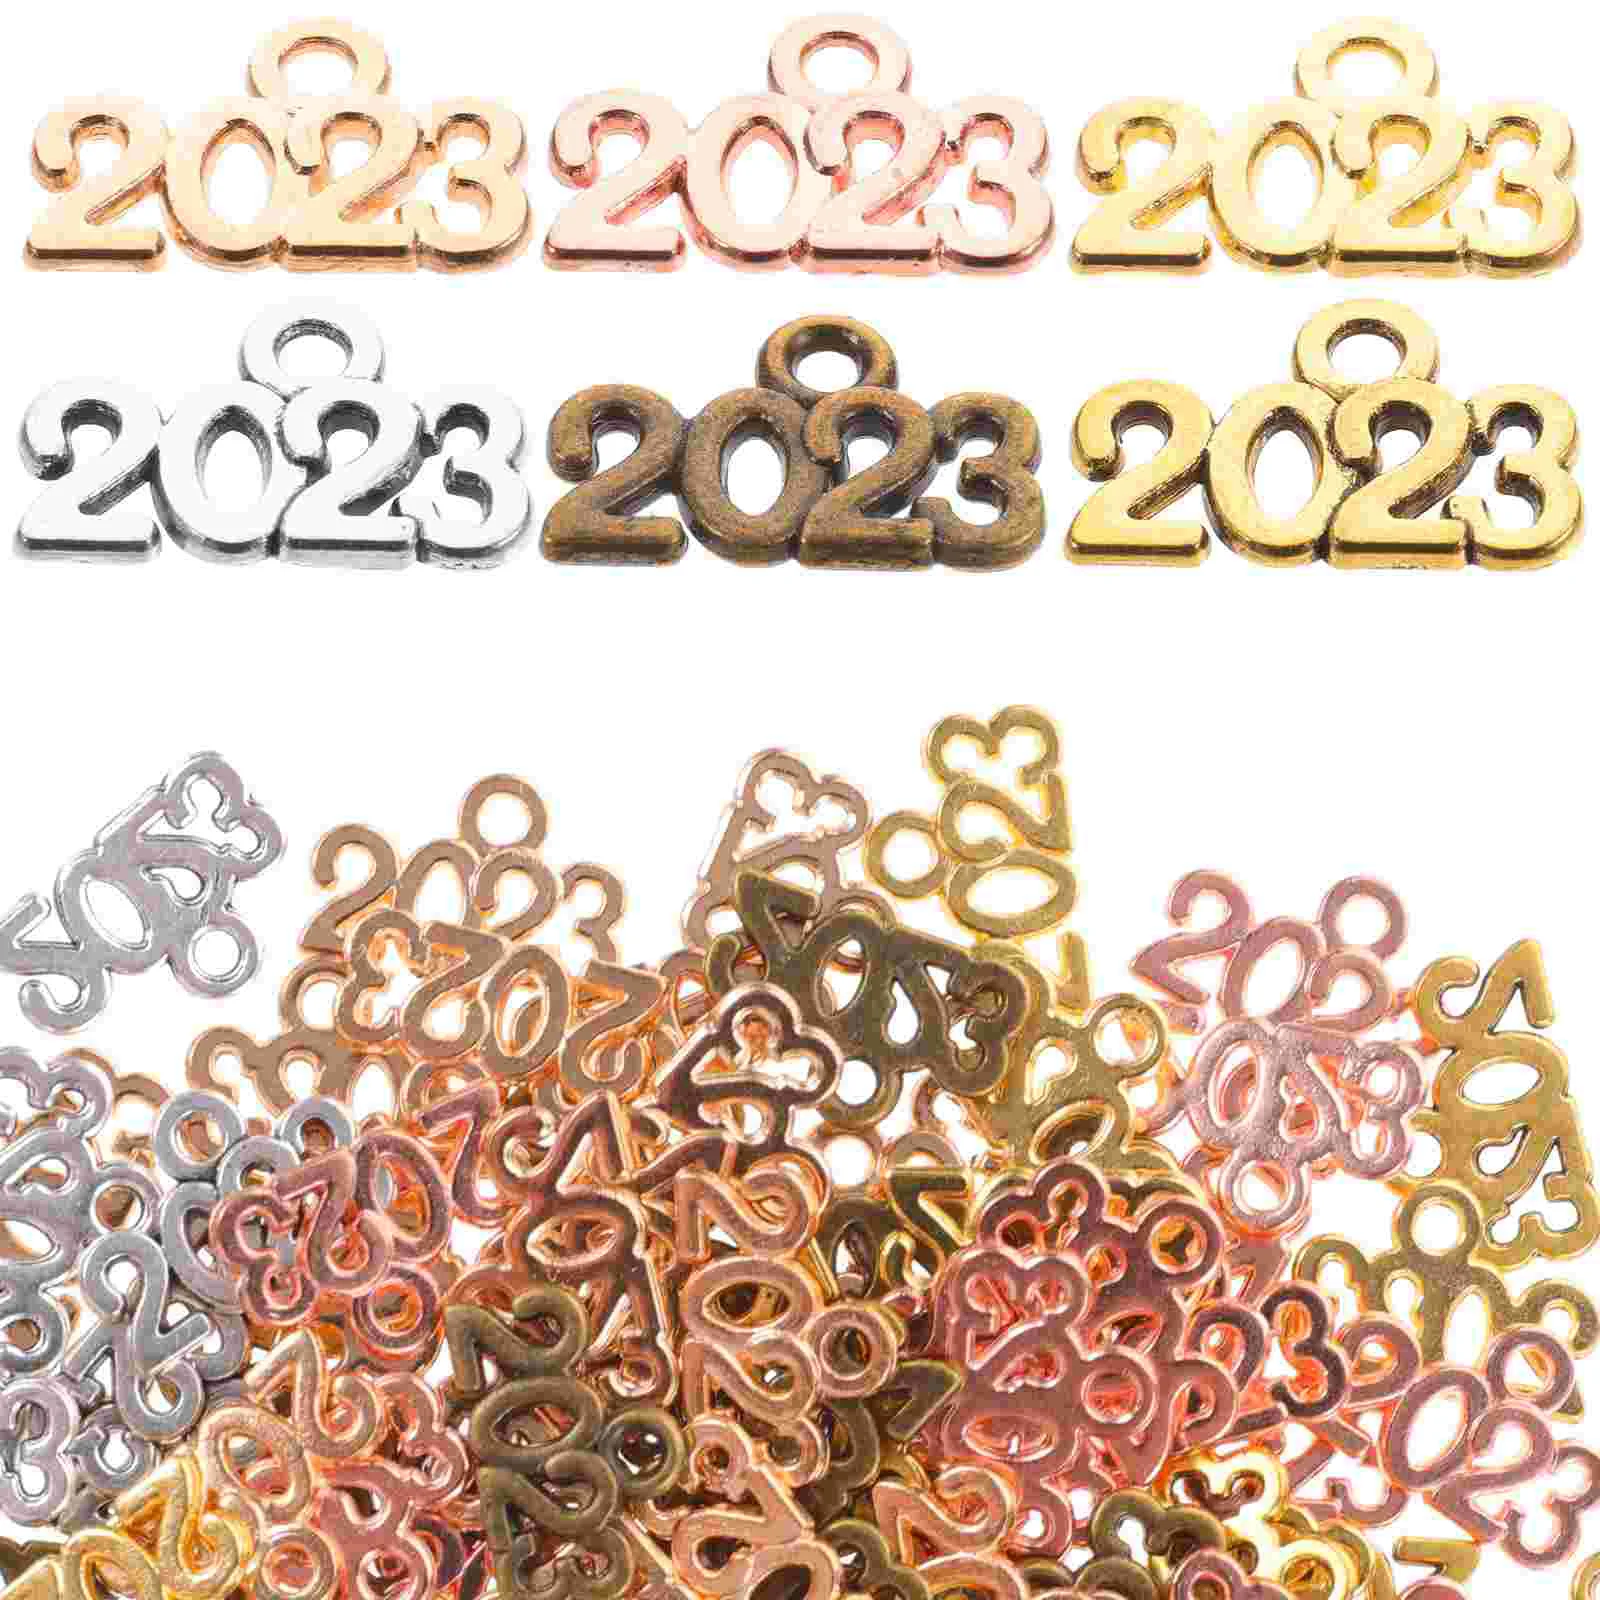 

100 Pcs 2023 Pendant Pendants Charms Jewelry Accessory Number Earrings Accessories Keychain Alloy Necklace Making Dainty